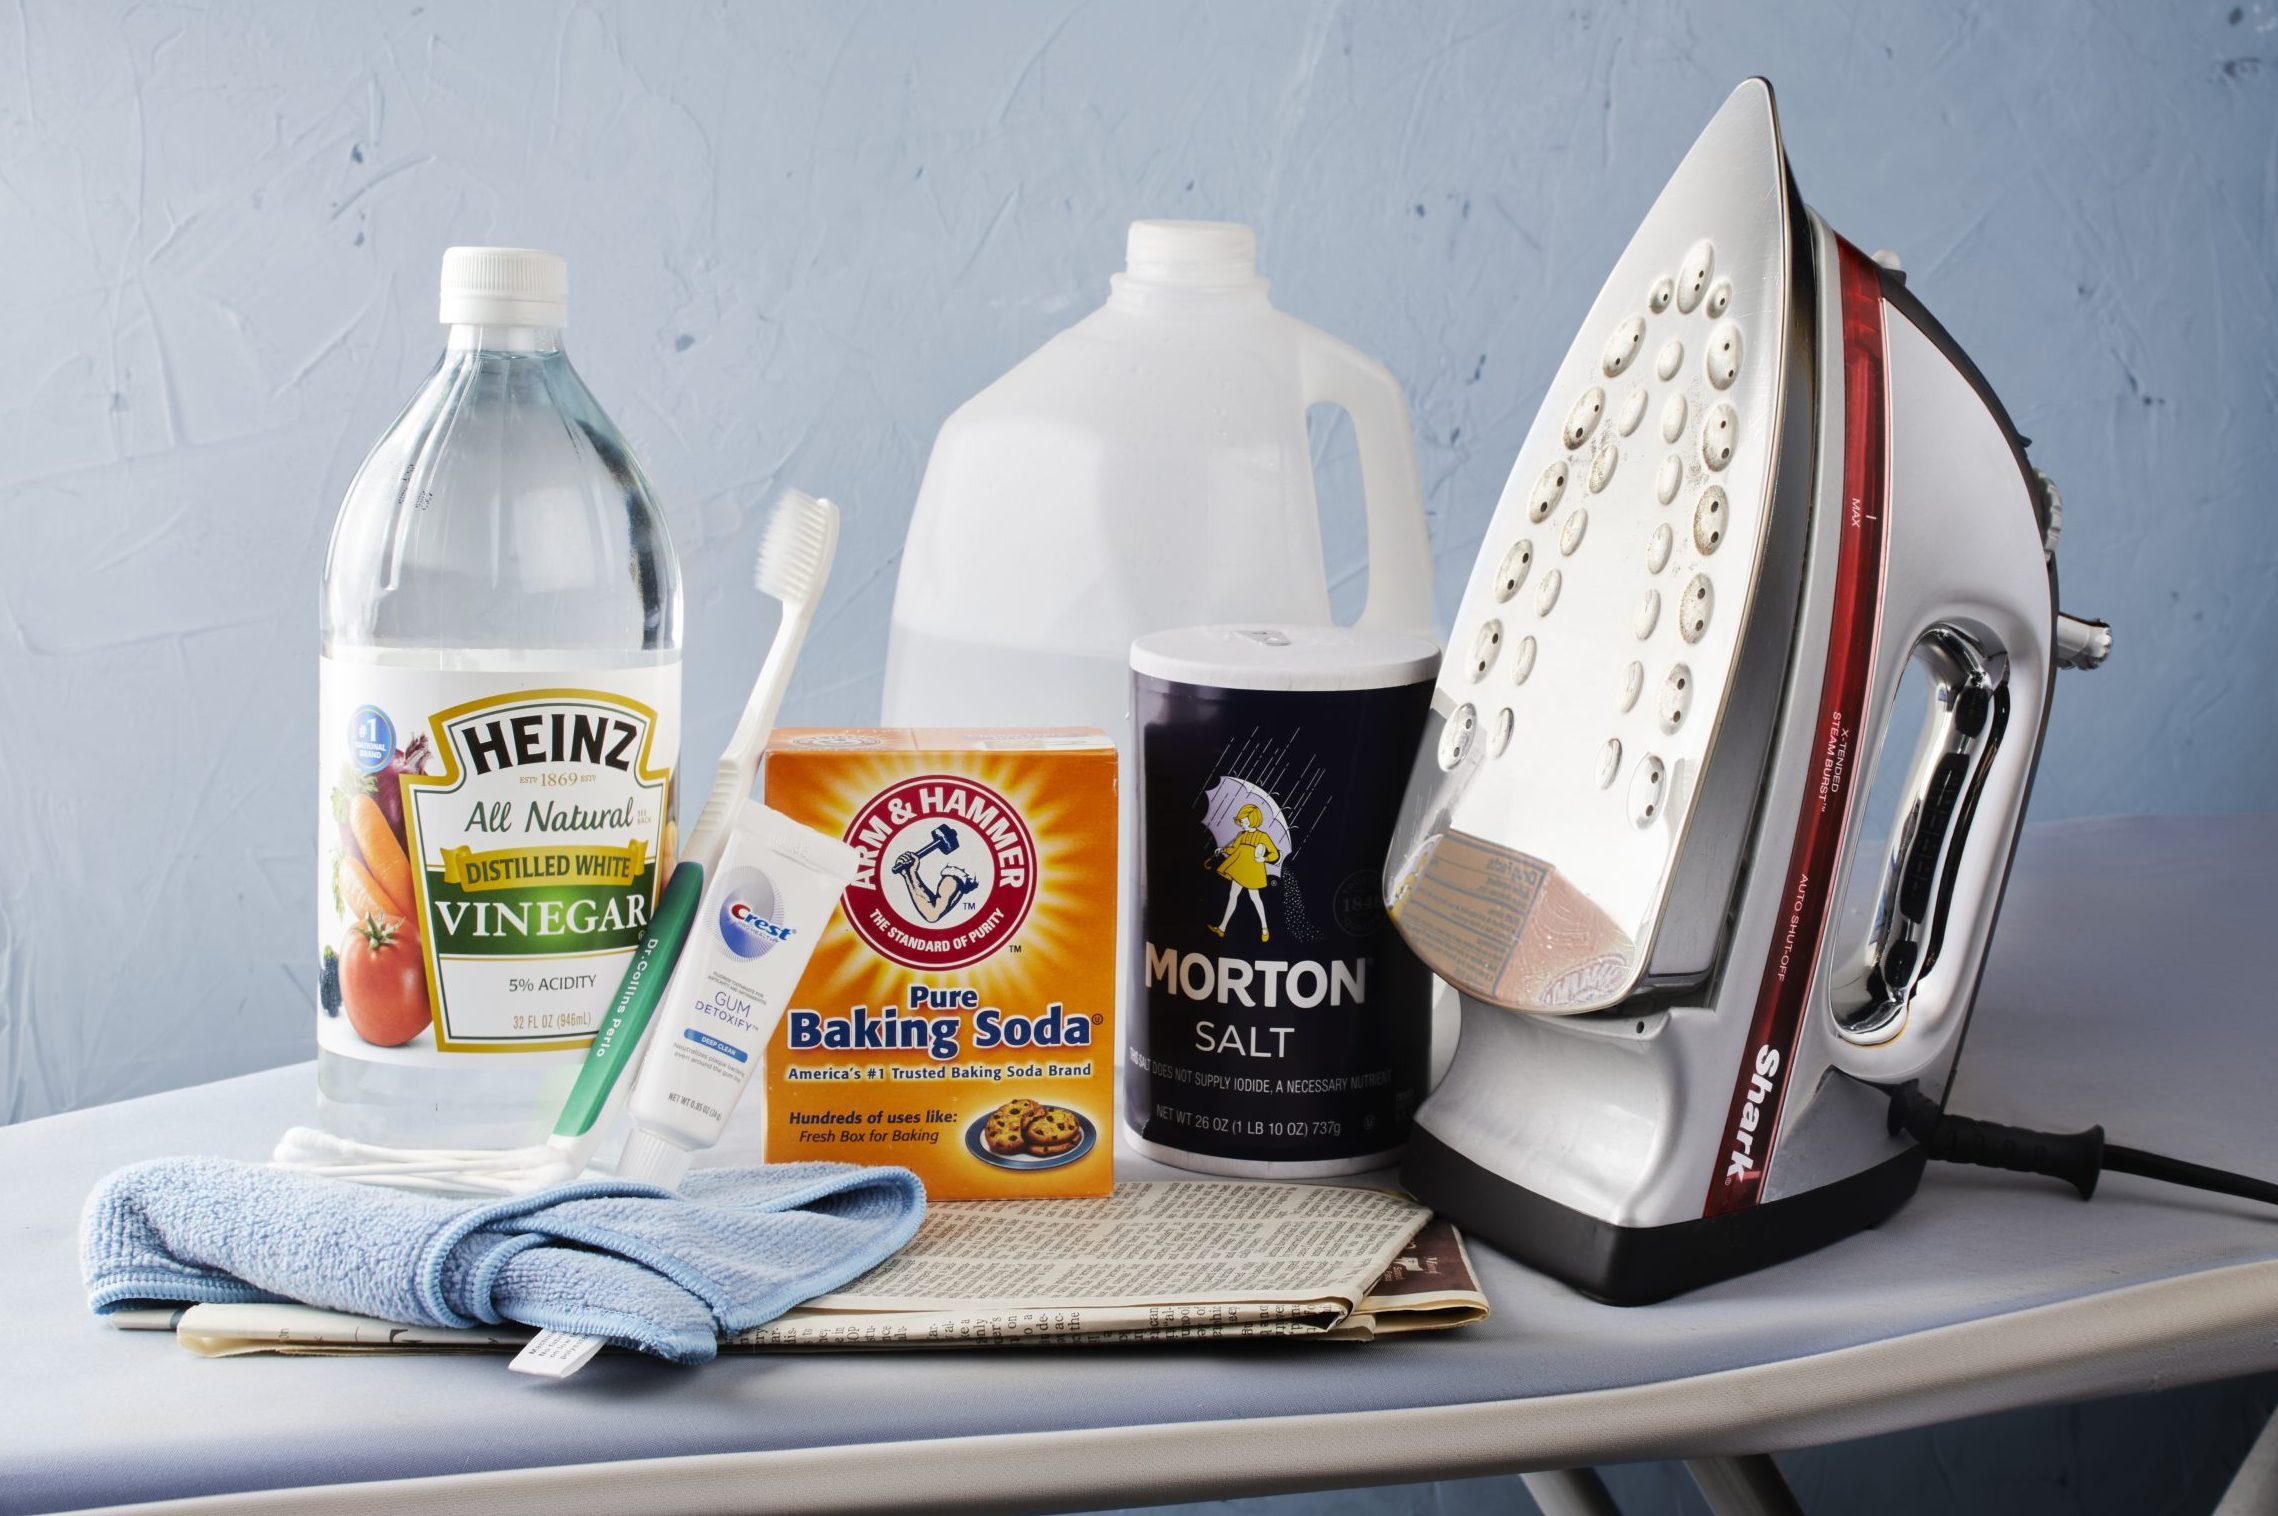 How to Clean an Iron: 11 Simple Ways to Clean Inside and Outside an Iron